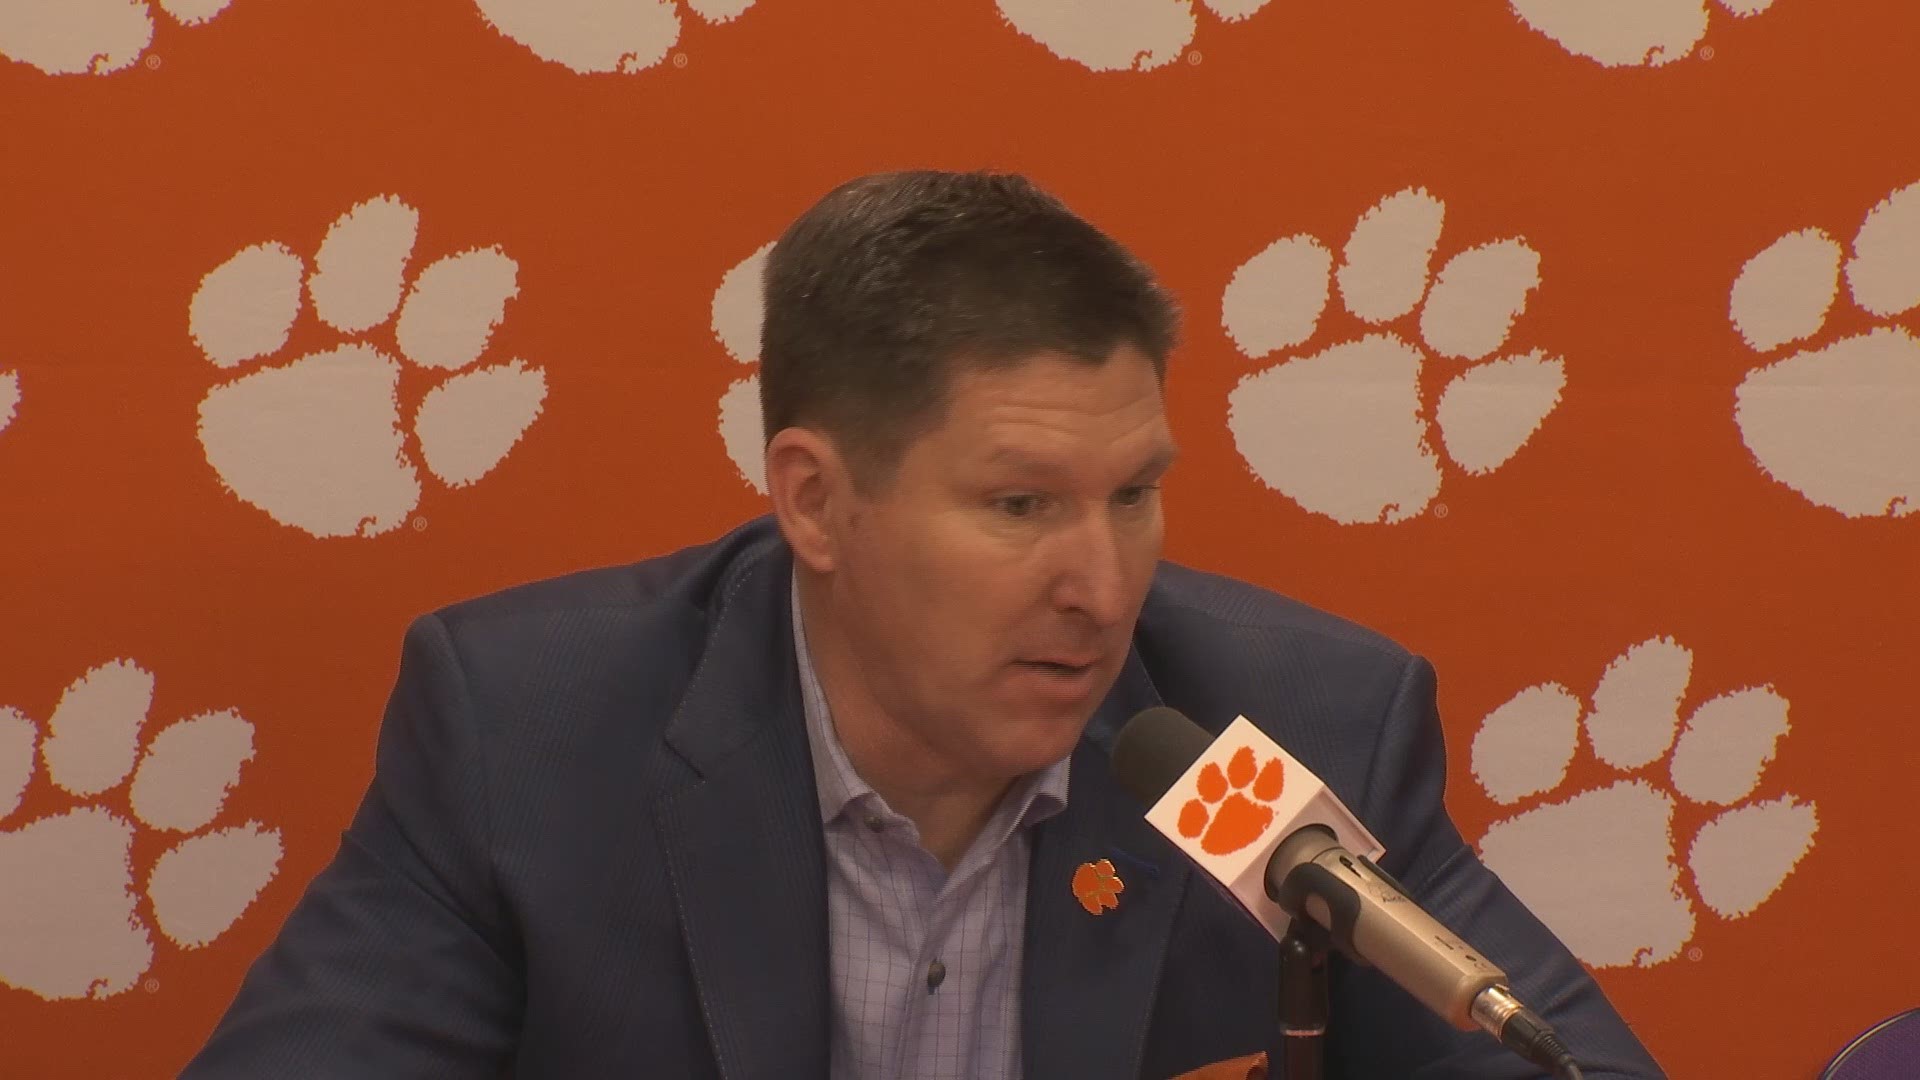 Brad Brownell talks about his team's win over #5 Louisville, the first time since 1979-80 season that the Tigers have 2 wins over top 5 opponents in 1 season